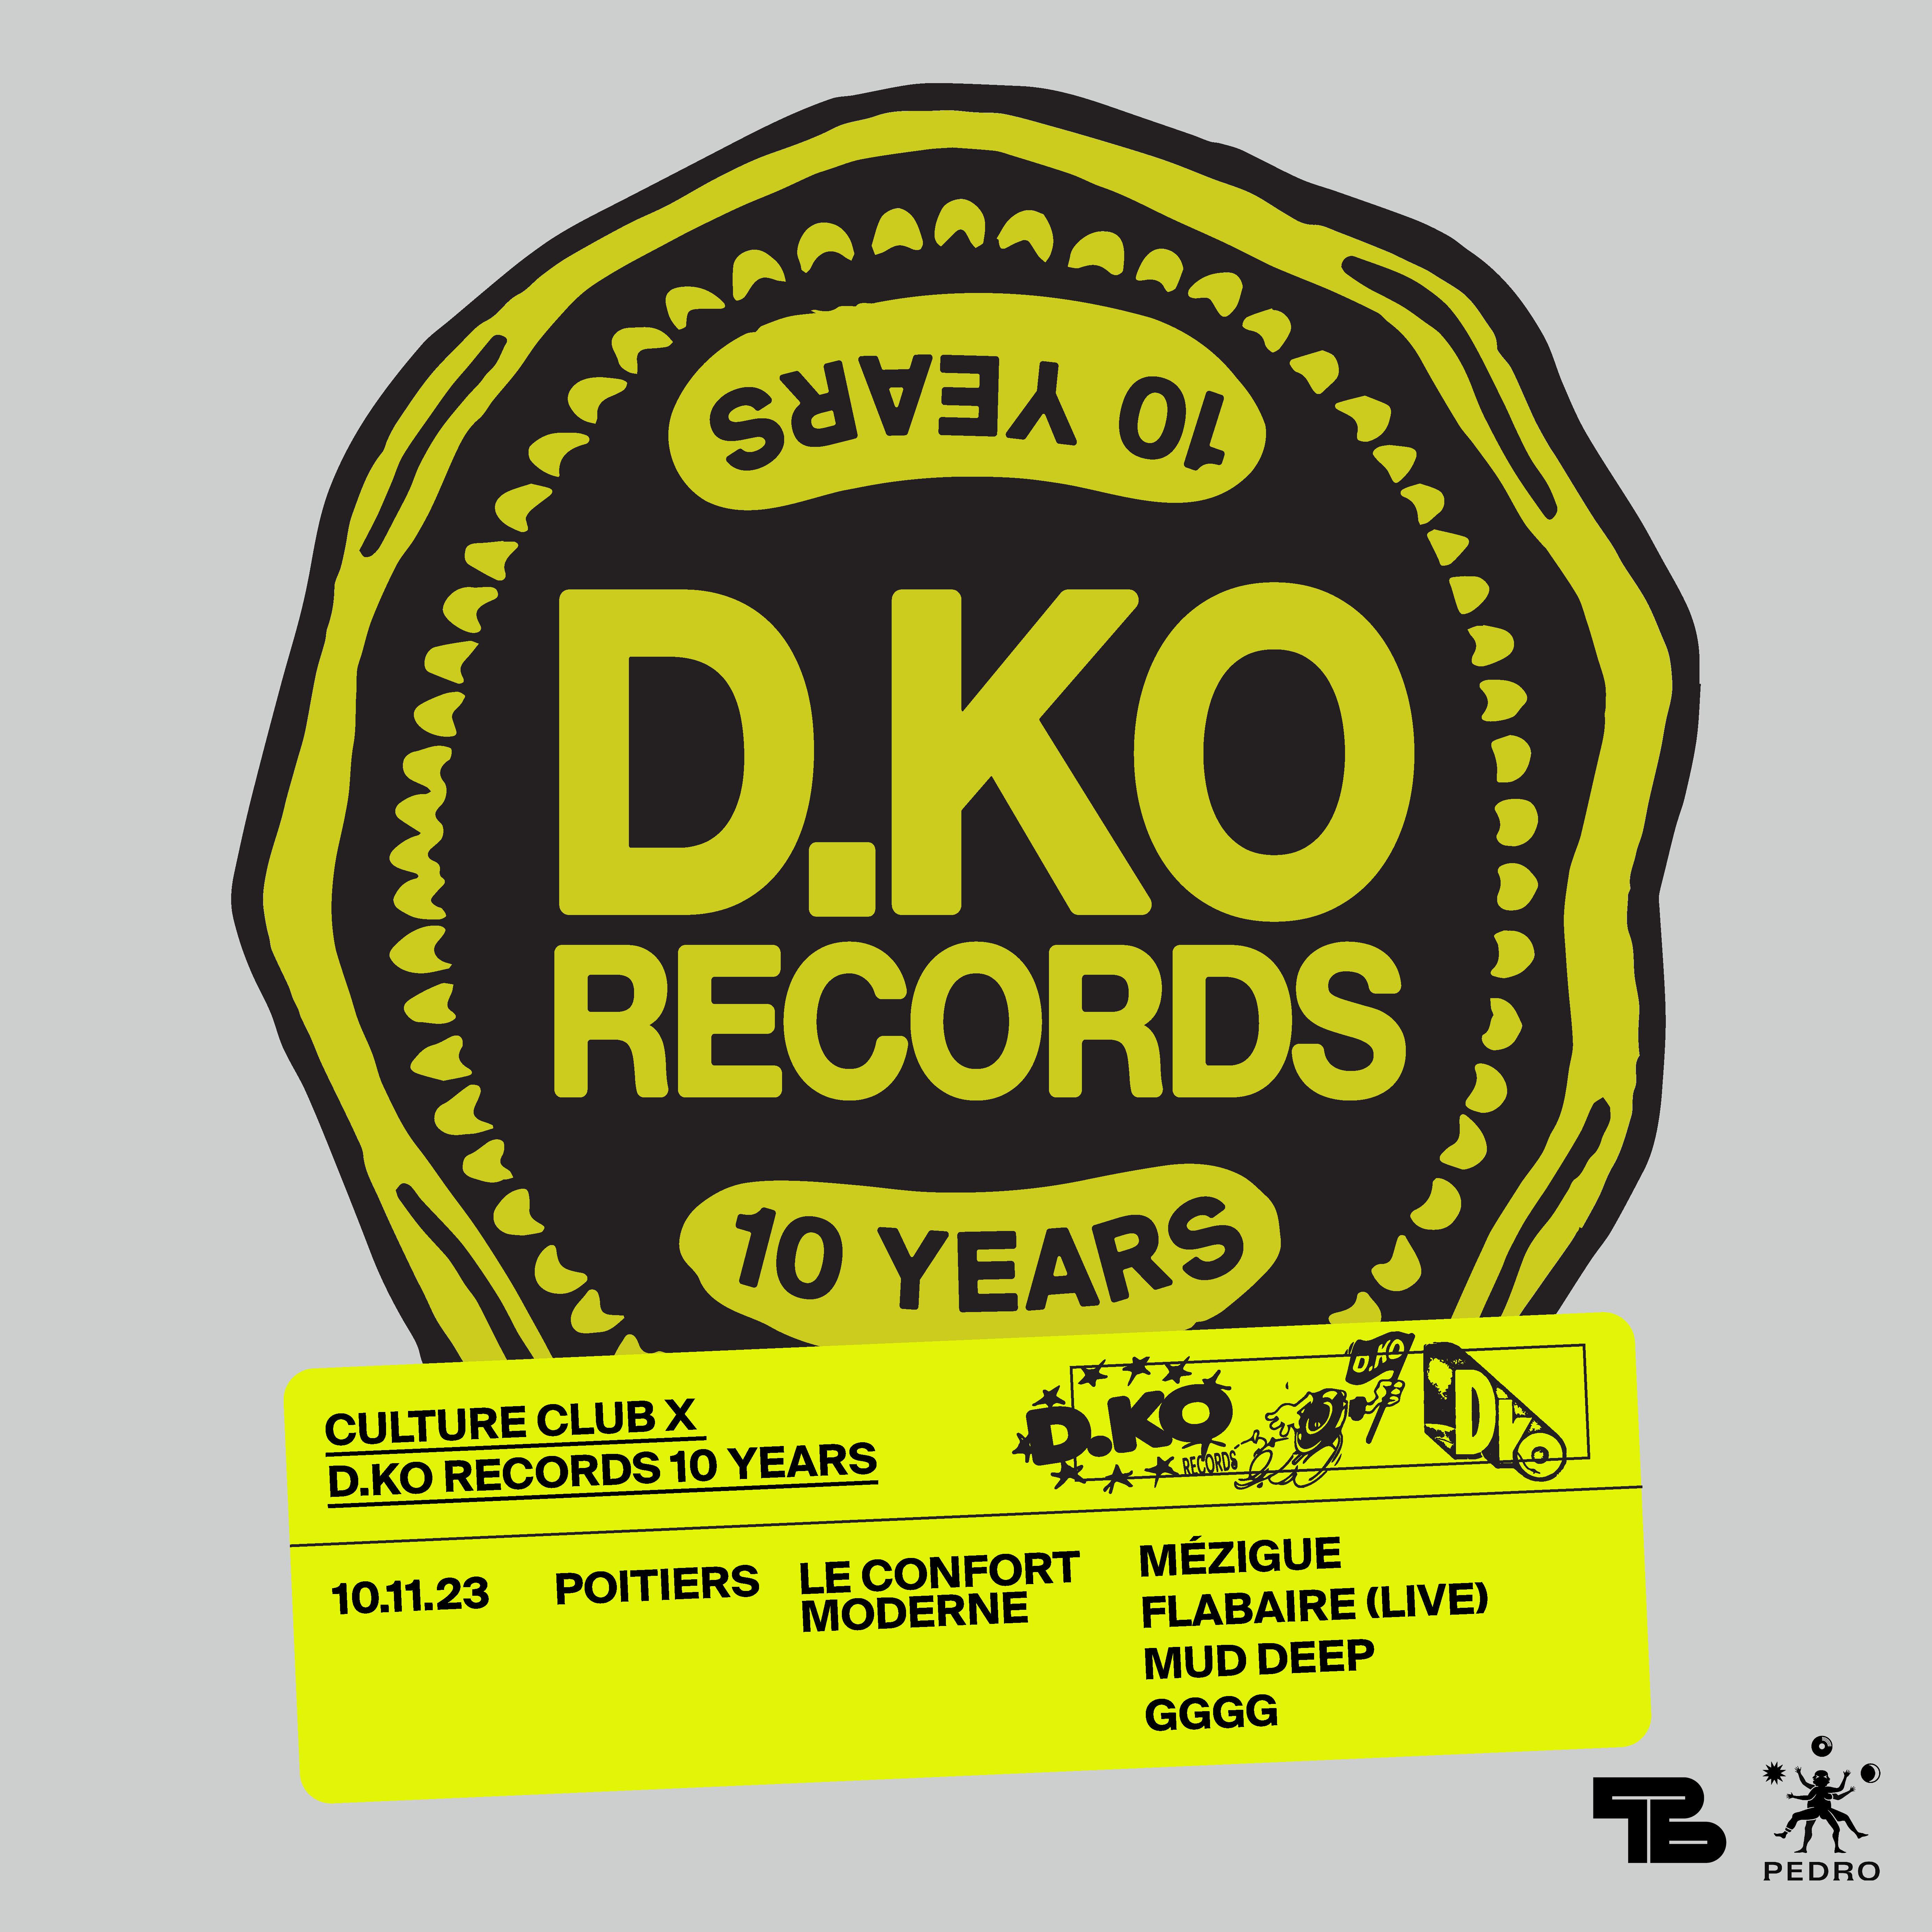 CULTURE CLUB x D.KO RECORDS 10 YEARS - フライヤー表